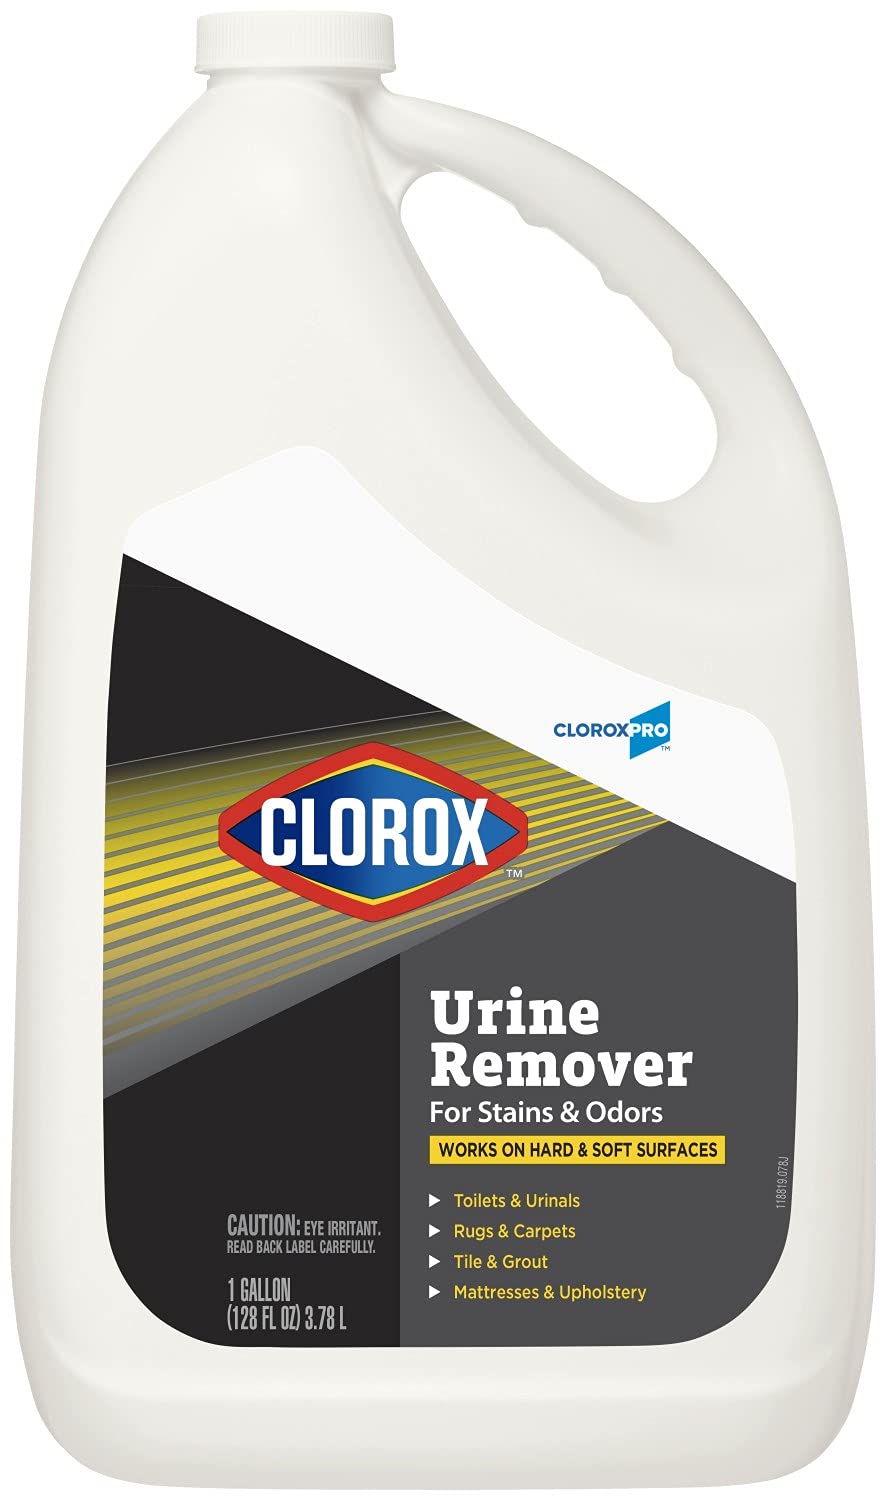 CloroxPro, Urine Remover for Stains and Odors, [...]